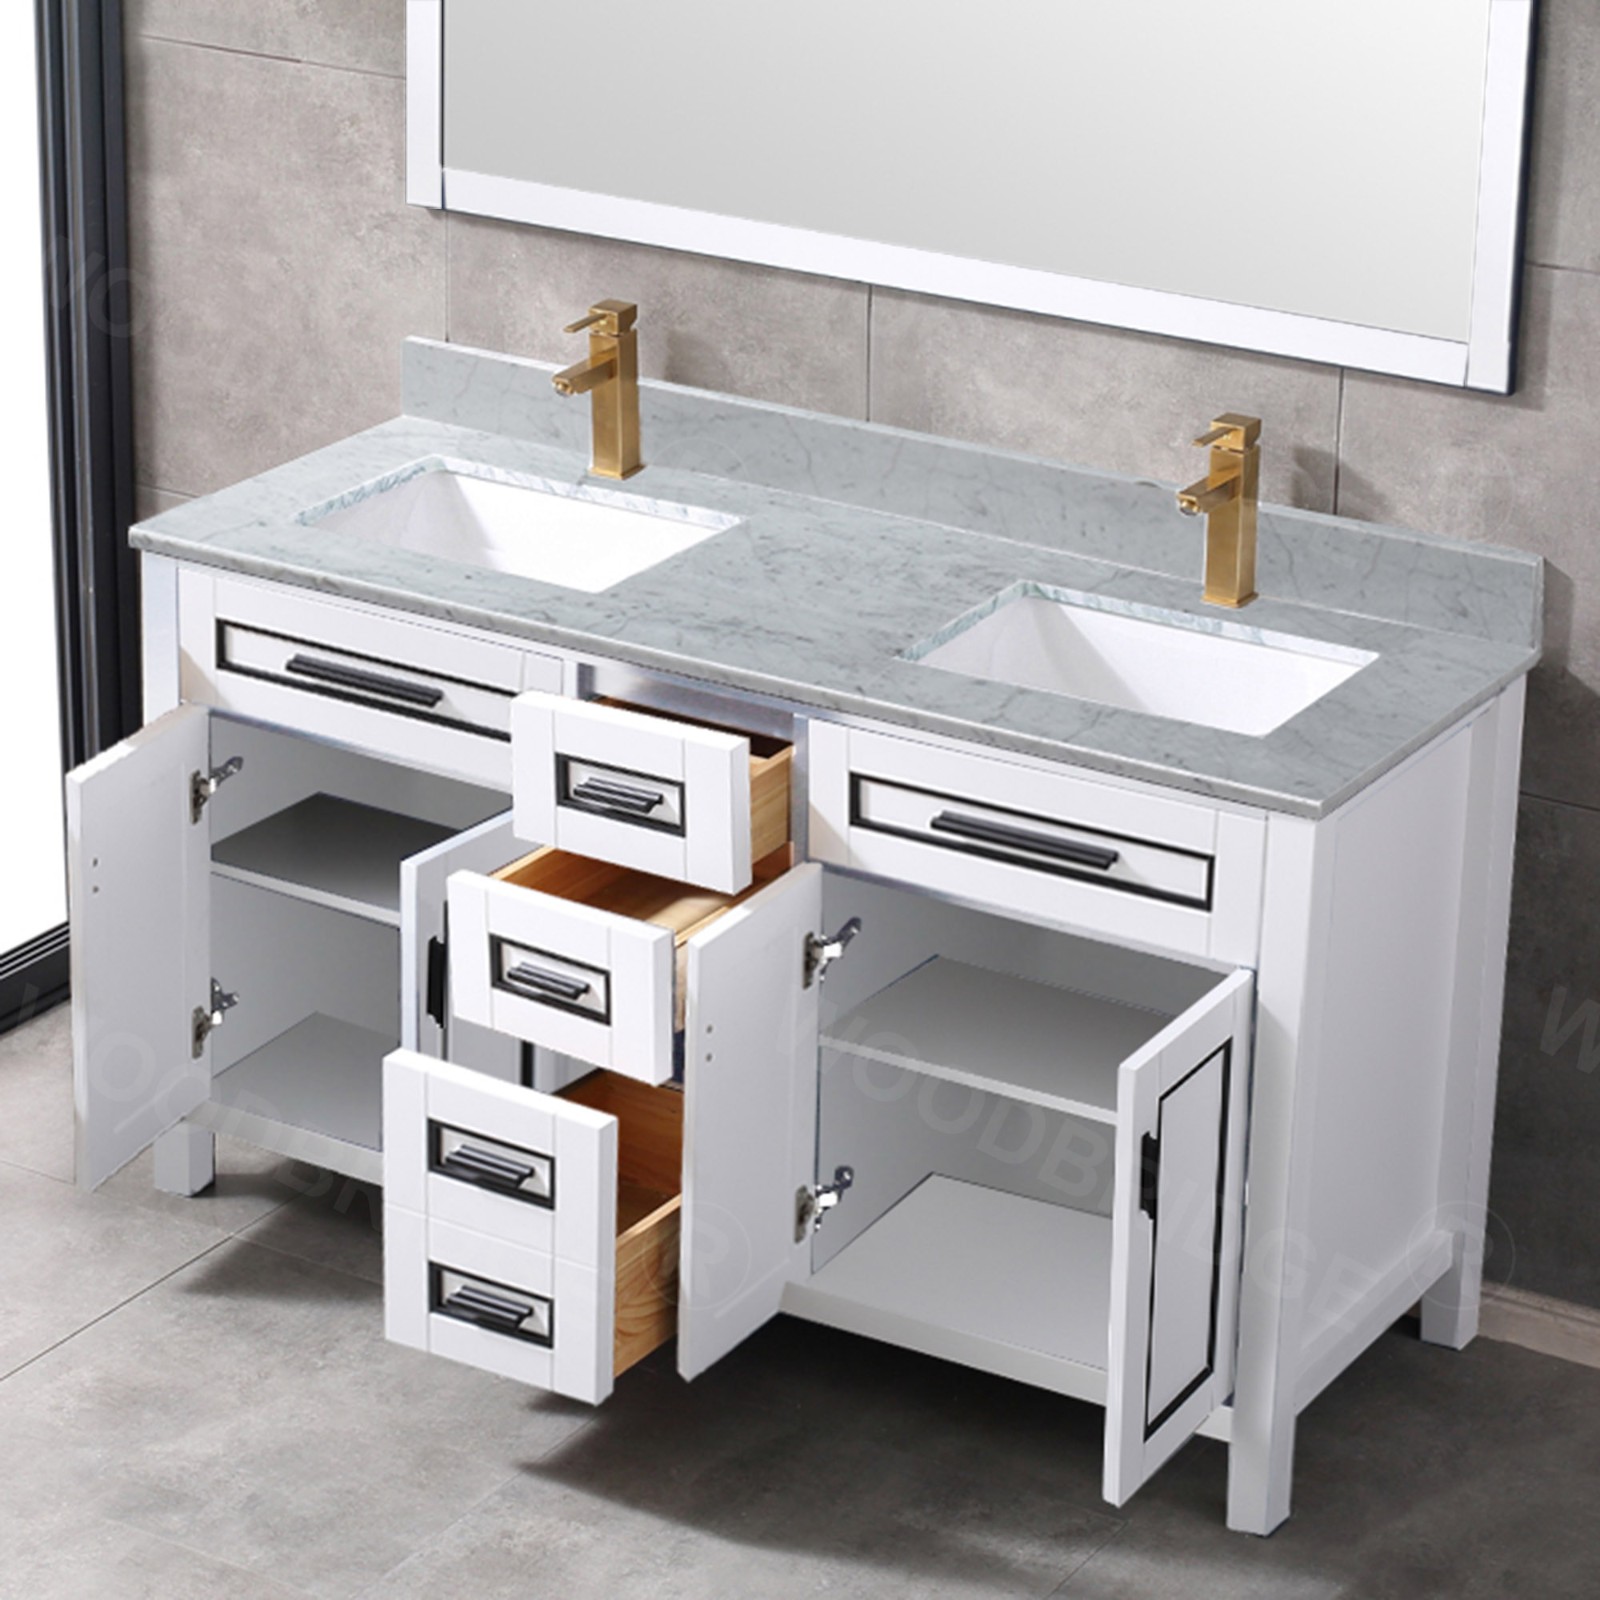  WOODBRIDGE Milan  61” Floor Mounted Single Basin Vanity Set with Solid Wood Cabinet in White, and Carrara White Marble Vanity Top with Pre-installed Undermount Rectangle Bathroom Sink in White, Pre-Drilled Single Faucet Hole_4622